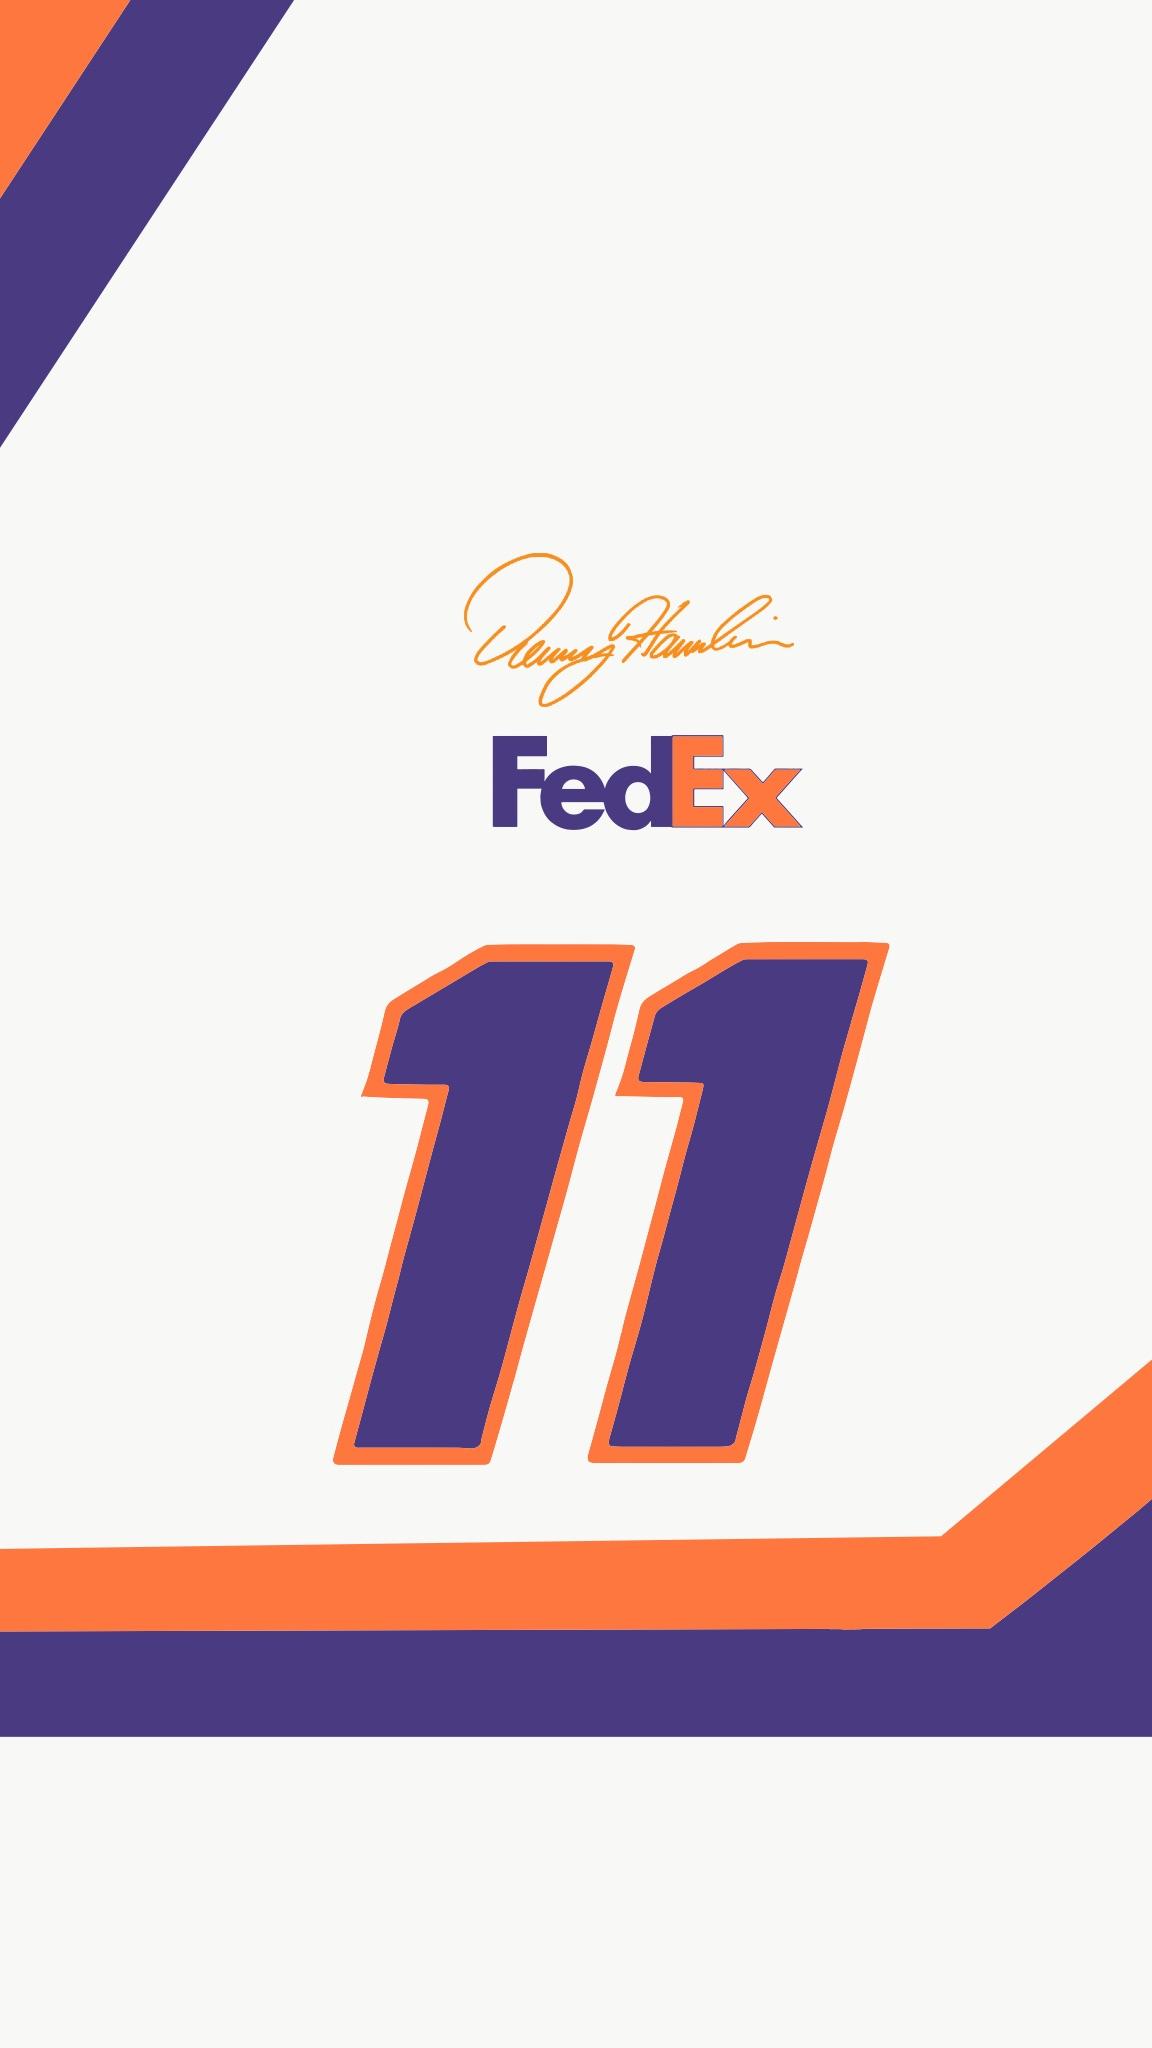 Made a Denny Wallpaper for iPhone